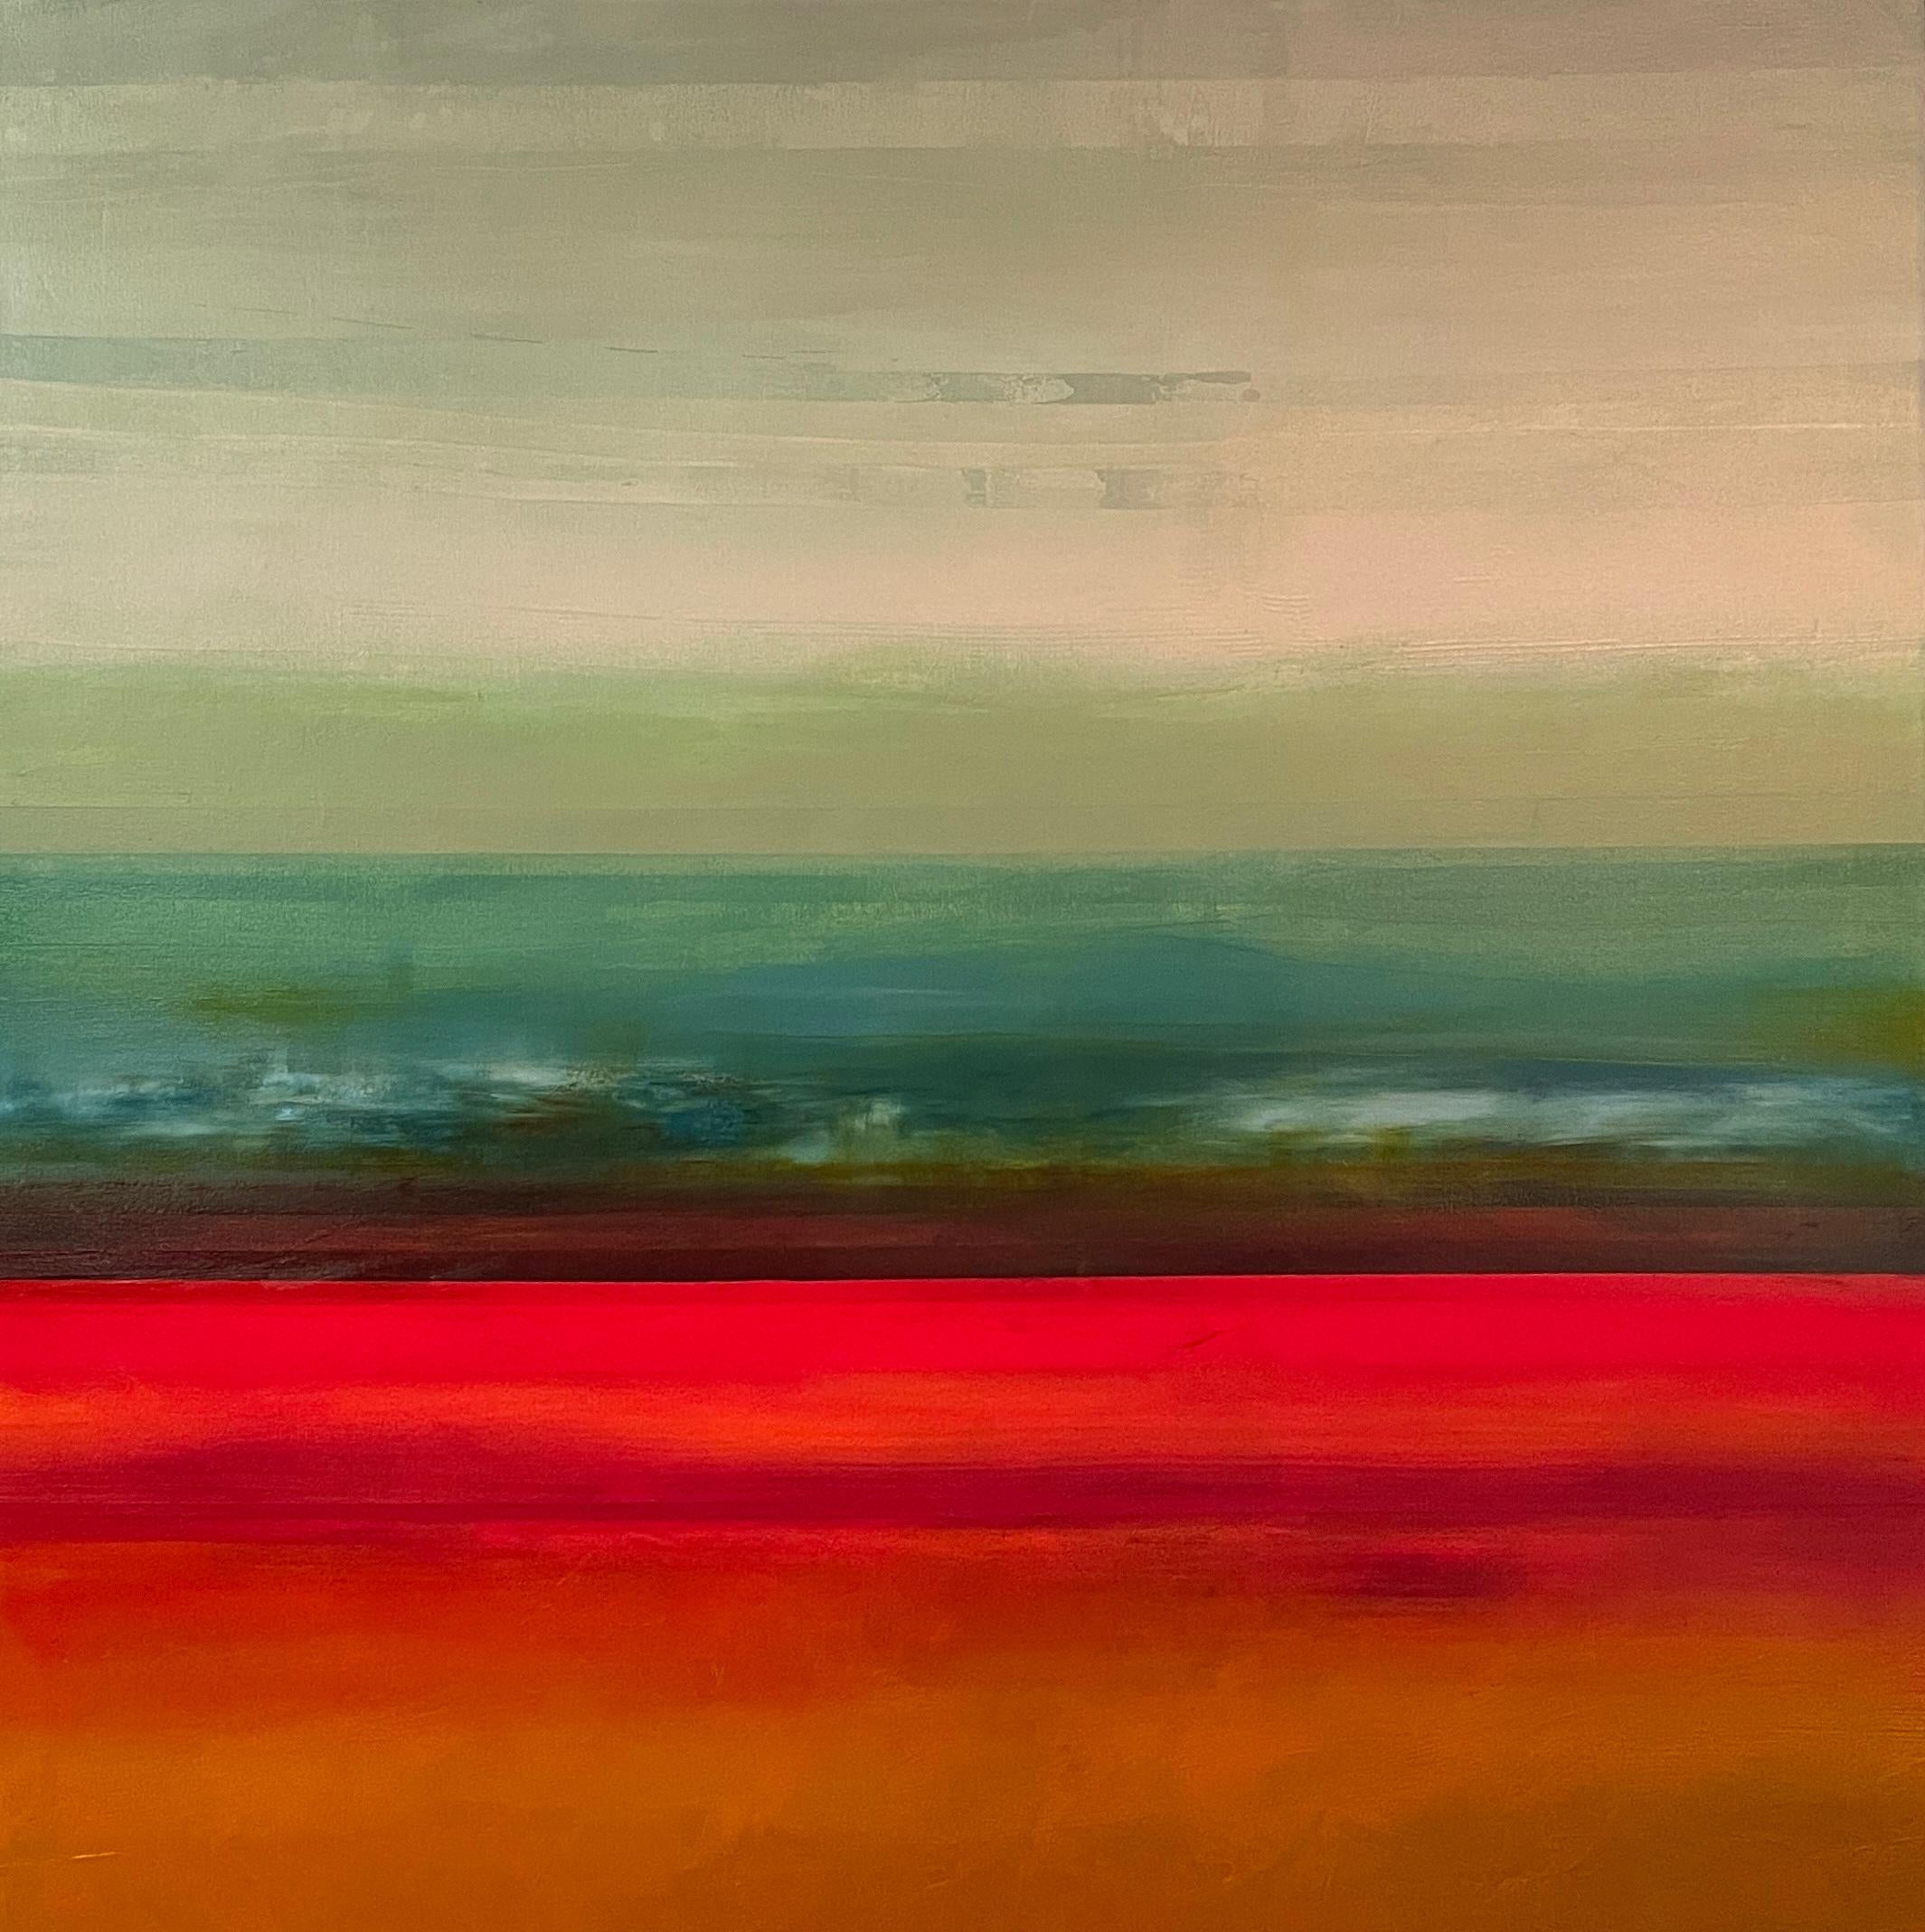 Katheryn Holt Landscape Painting – "Into the Sky" Large Mixed Media Contemporary Abstract Expressionist Landscape